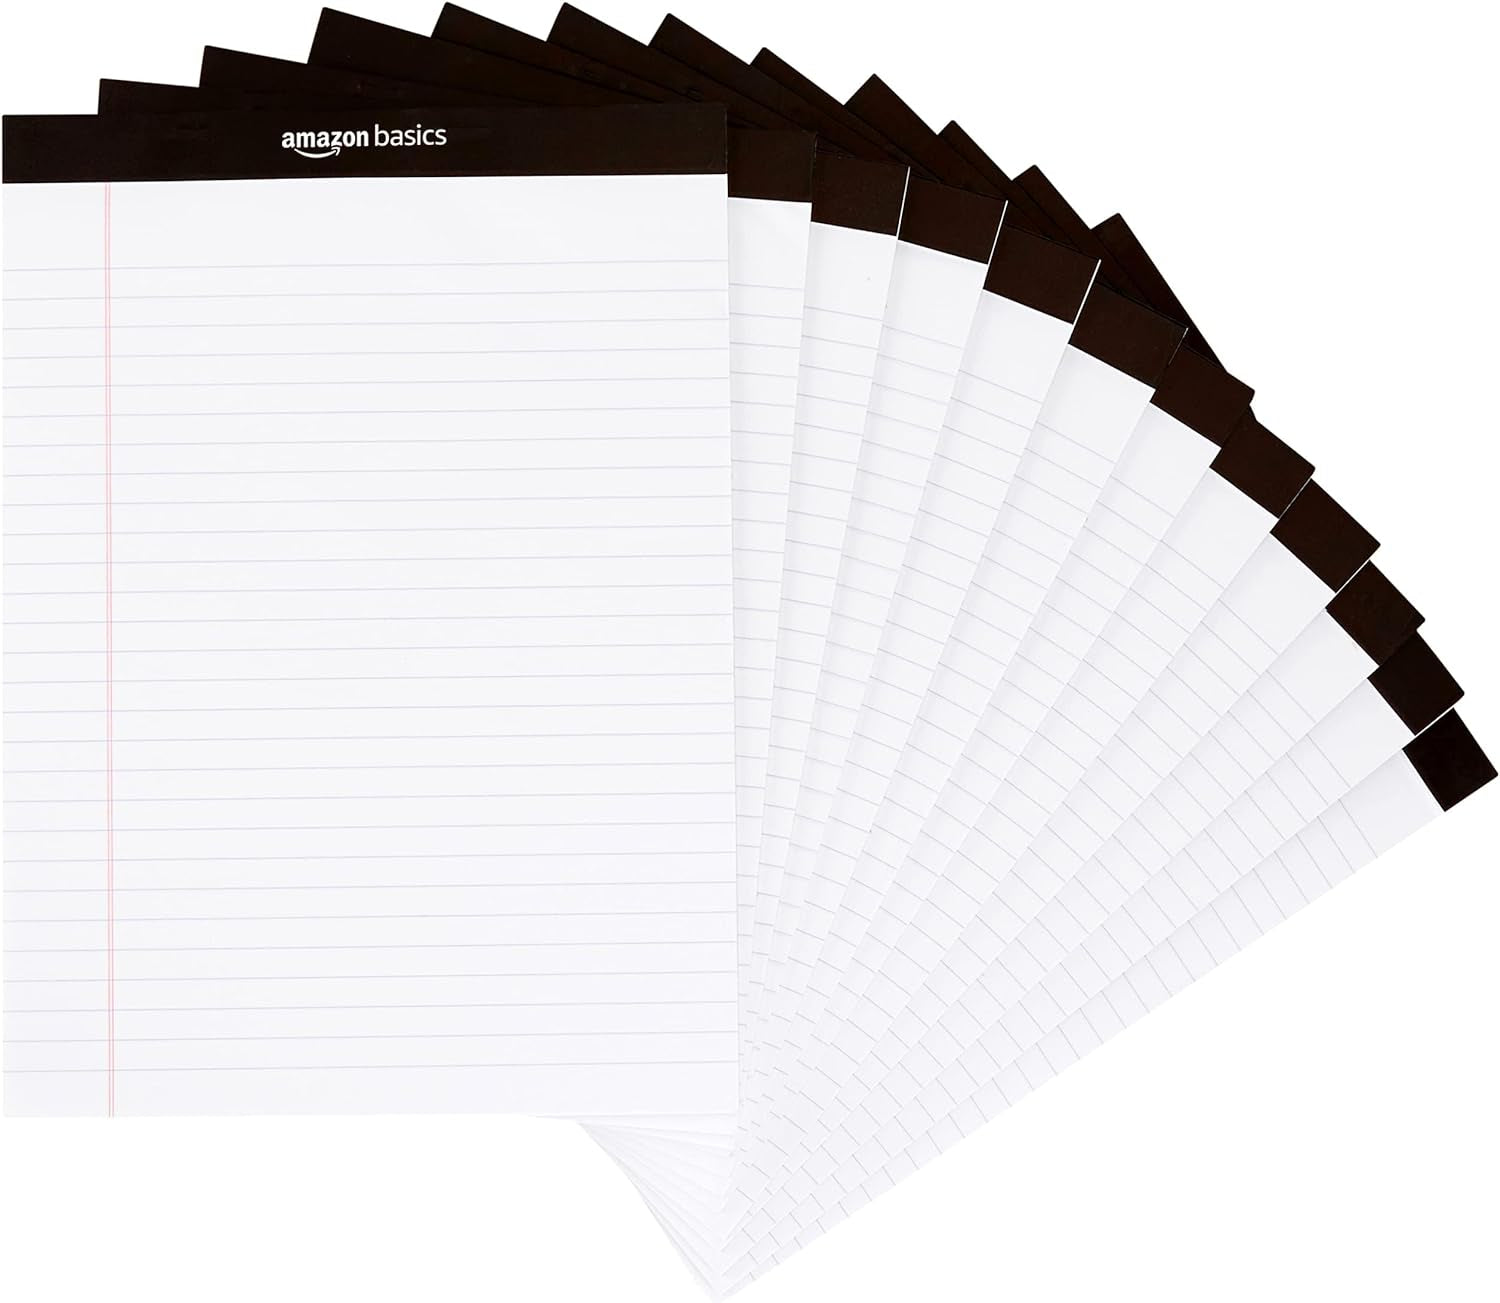 Narrow Ruled 5 X 8-Inch Lined Writing Note Pads, 6 Count (50 Sheet Pads), Multicolor